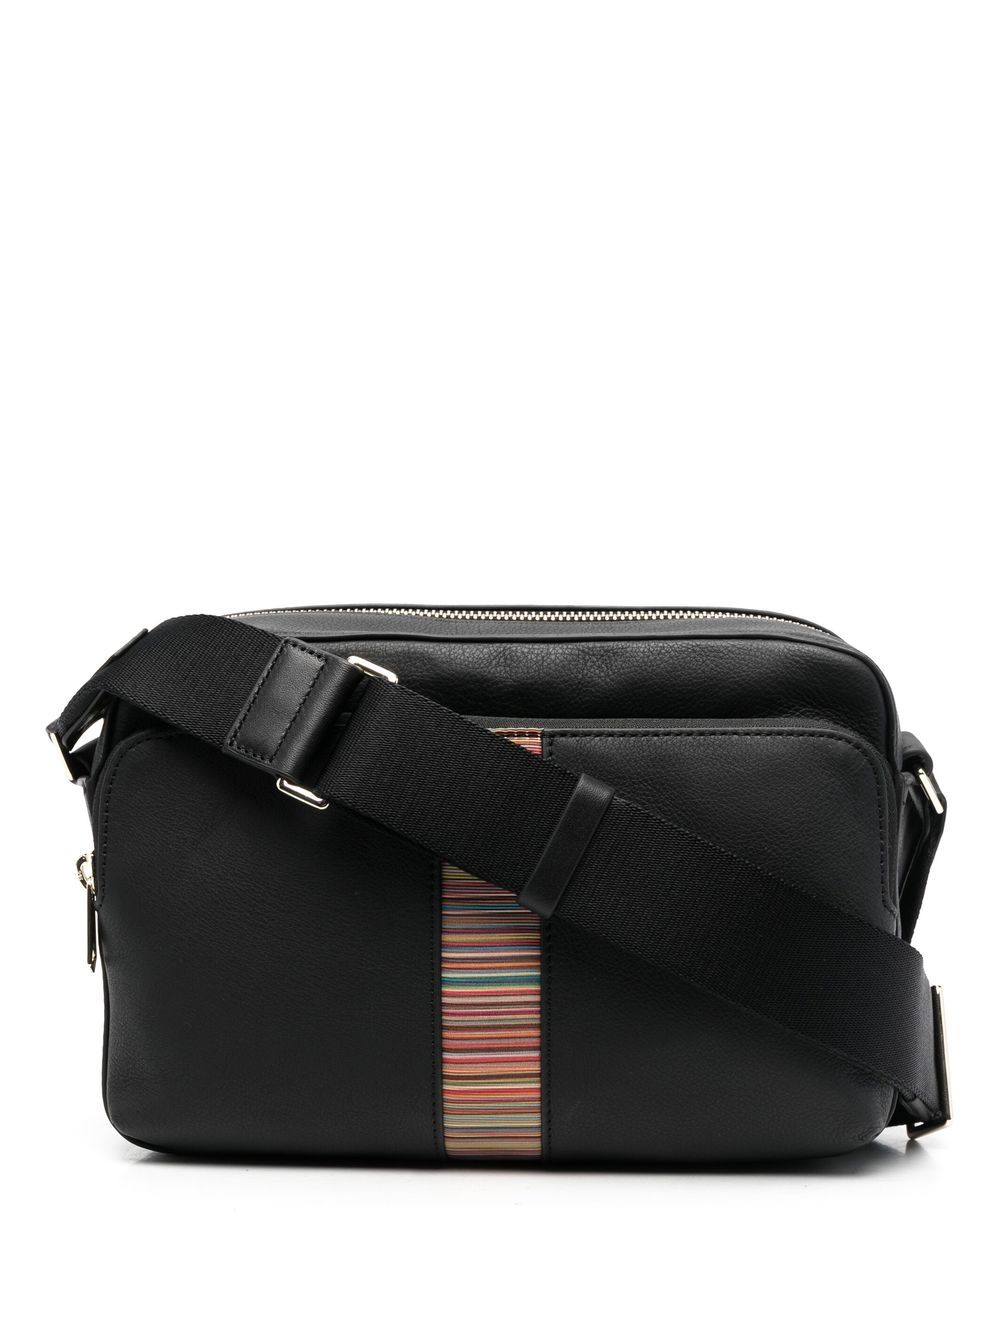 PS Paul Smith logo-patch messenger bag price in Doha Qatar